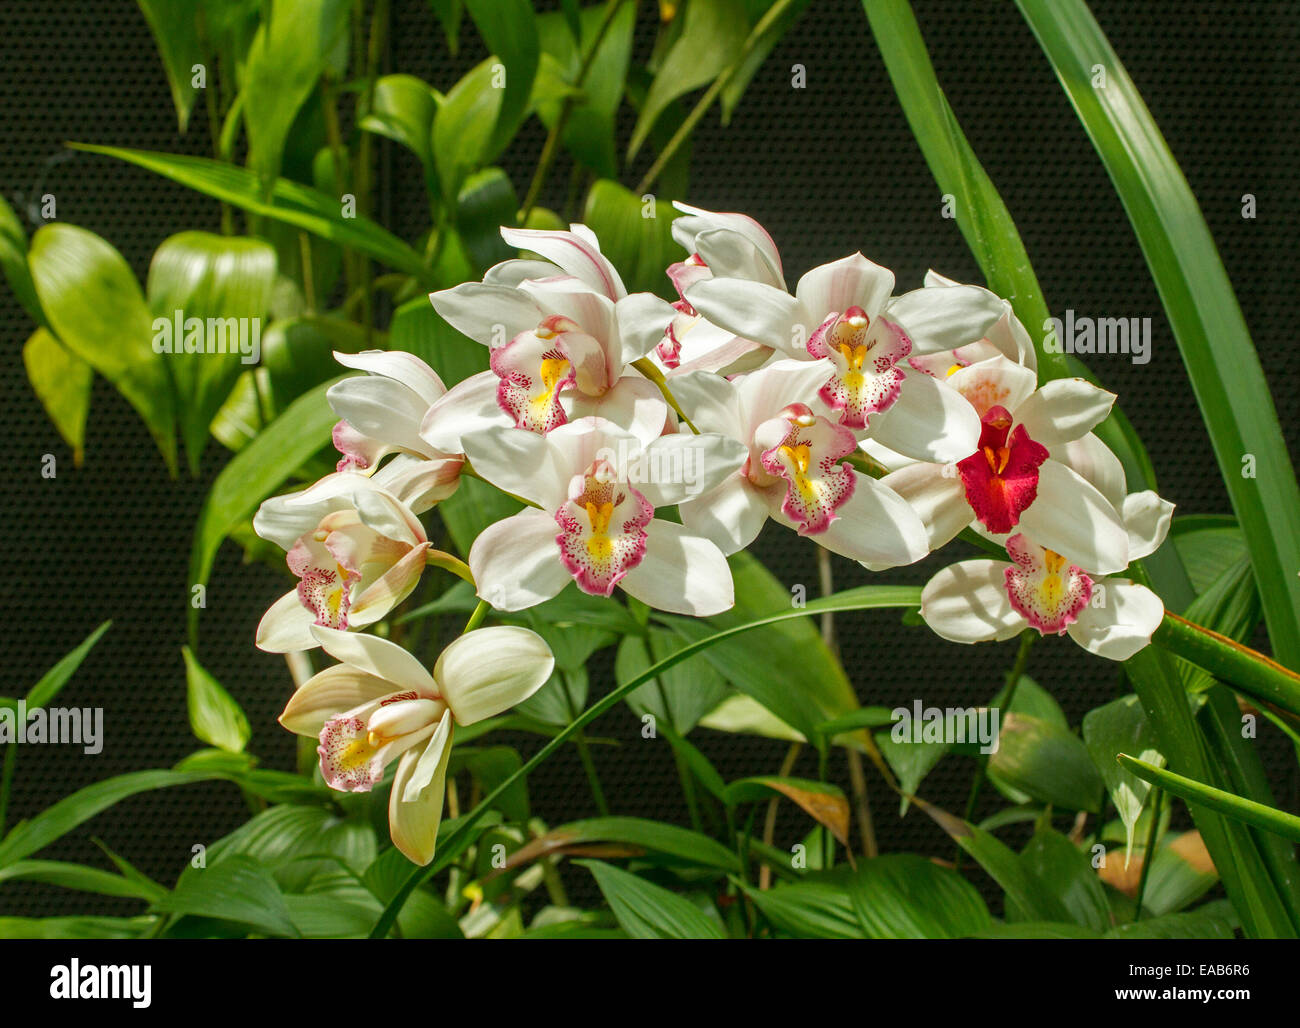 Large cluster of spectacular white and red cymbidium orchids with yellow throats and emerald foliage against black background Stock Photo